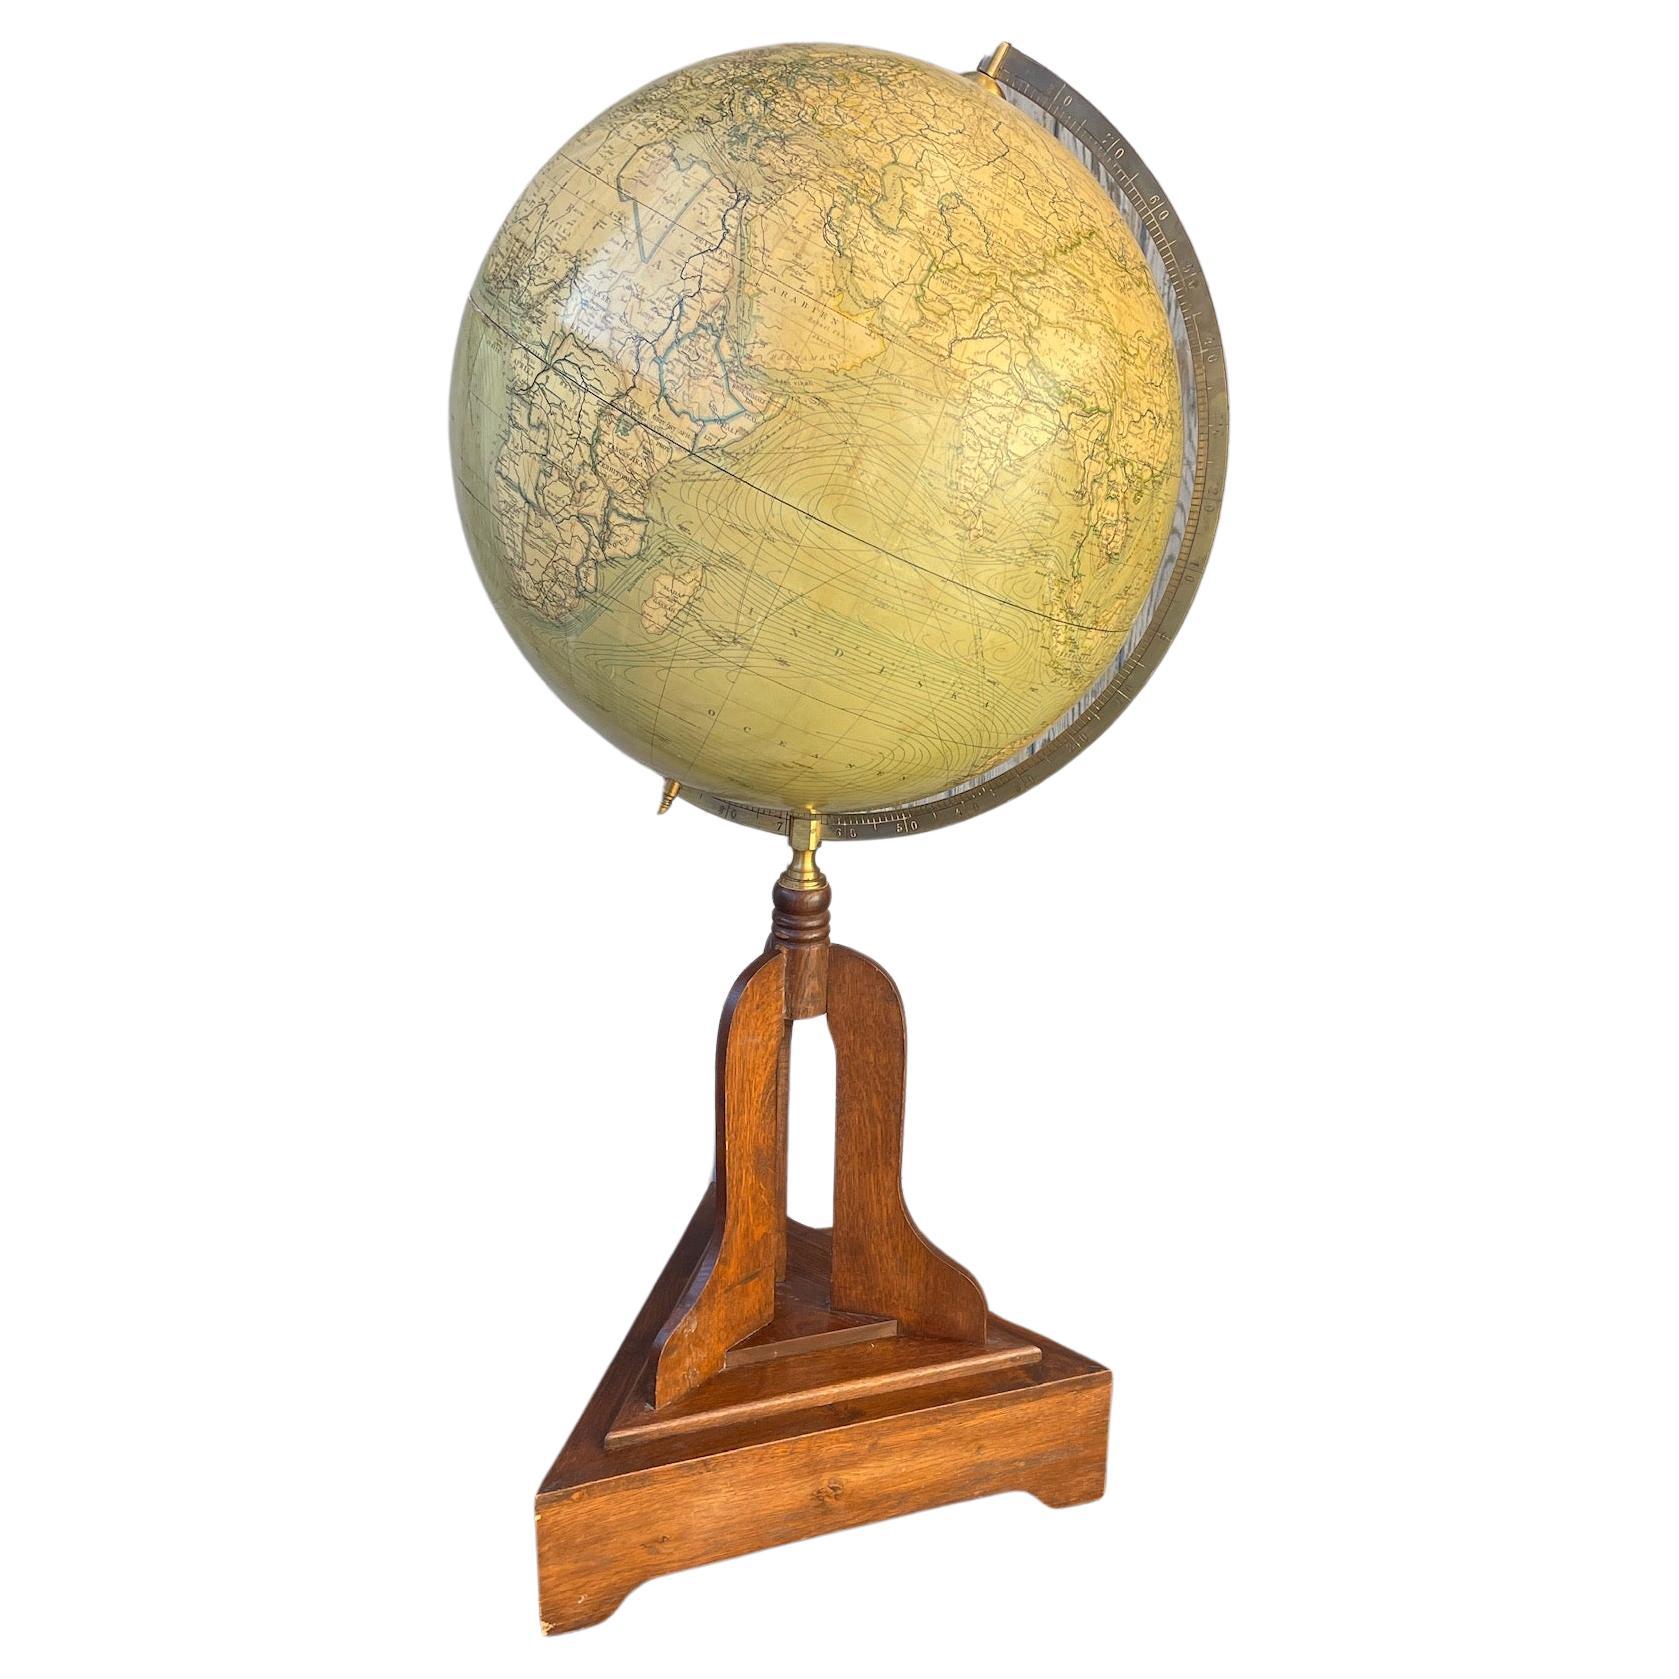 Large Vintage Globe on Wood Base, circa 1920's

Decorate an office or a desk with this beautifully preserved antique globe. Crafted in Europe, circa 1920's this piece is mounted on a simple wooden pedestal base.  